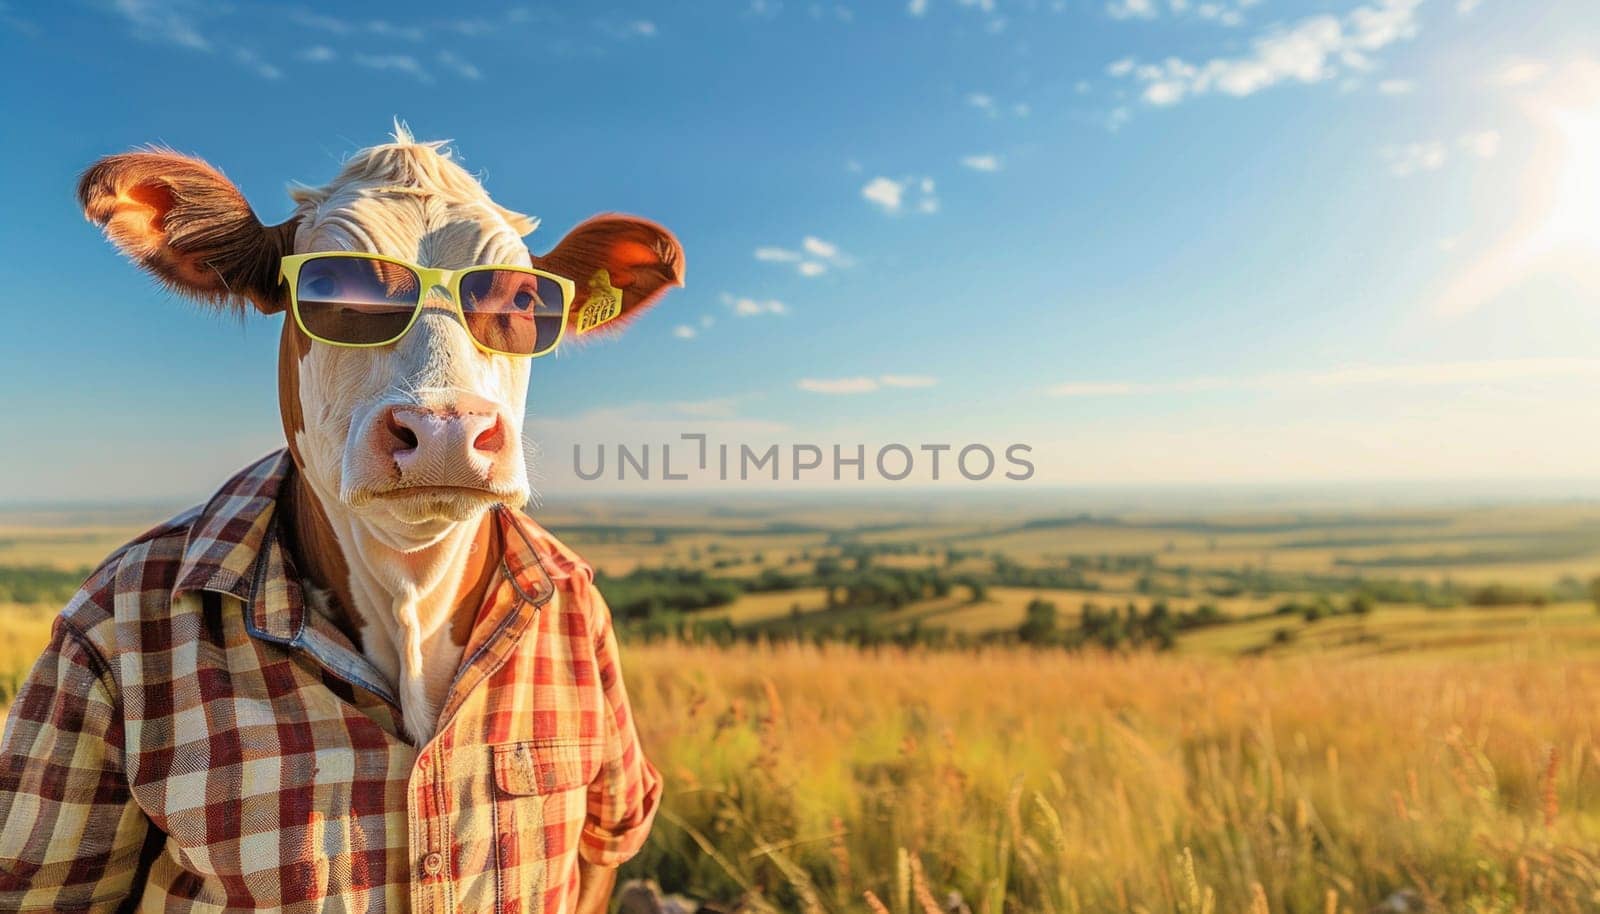 A cow in a plaid shirt and sunglasses stands in the field under the sky, providing a quirky and amusing sight